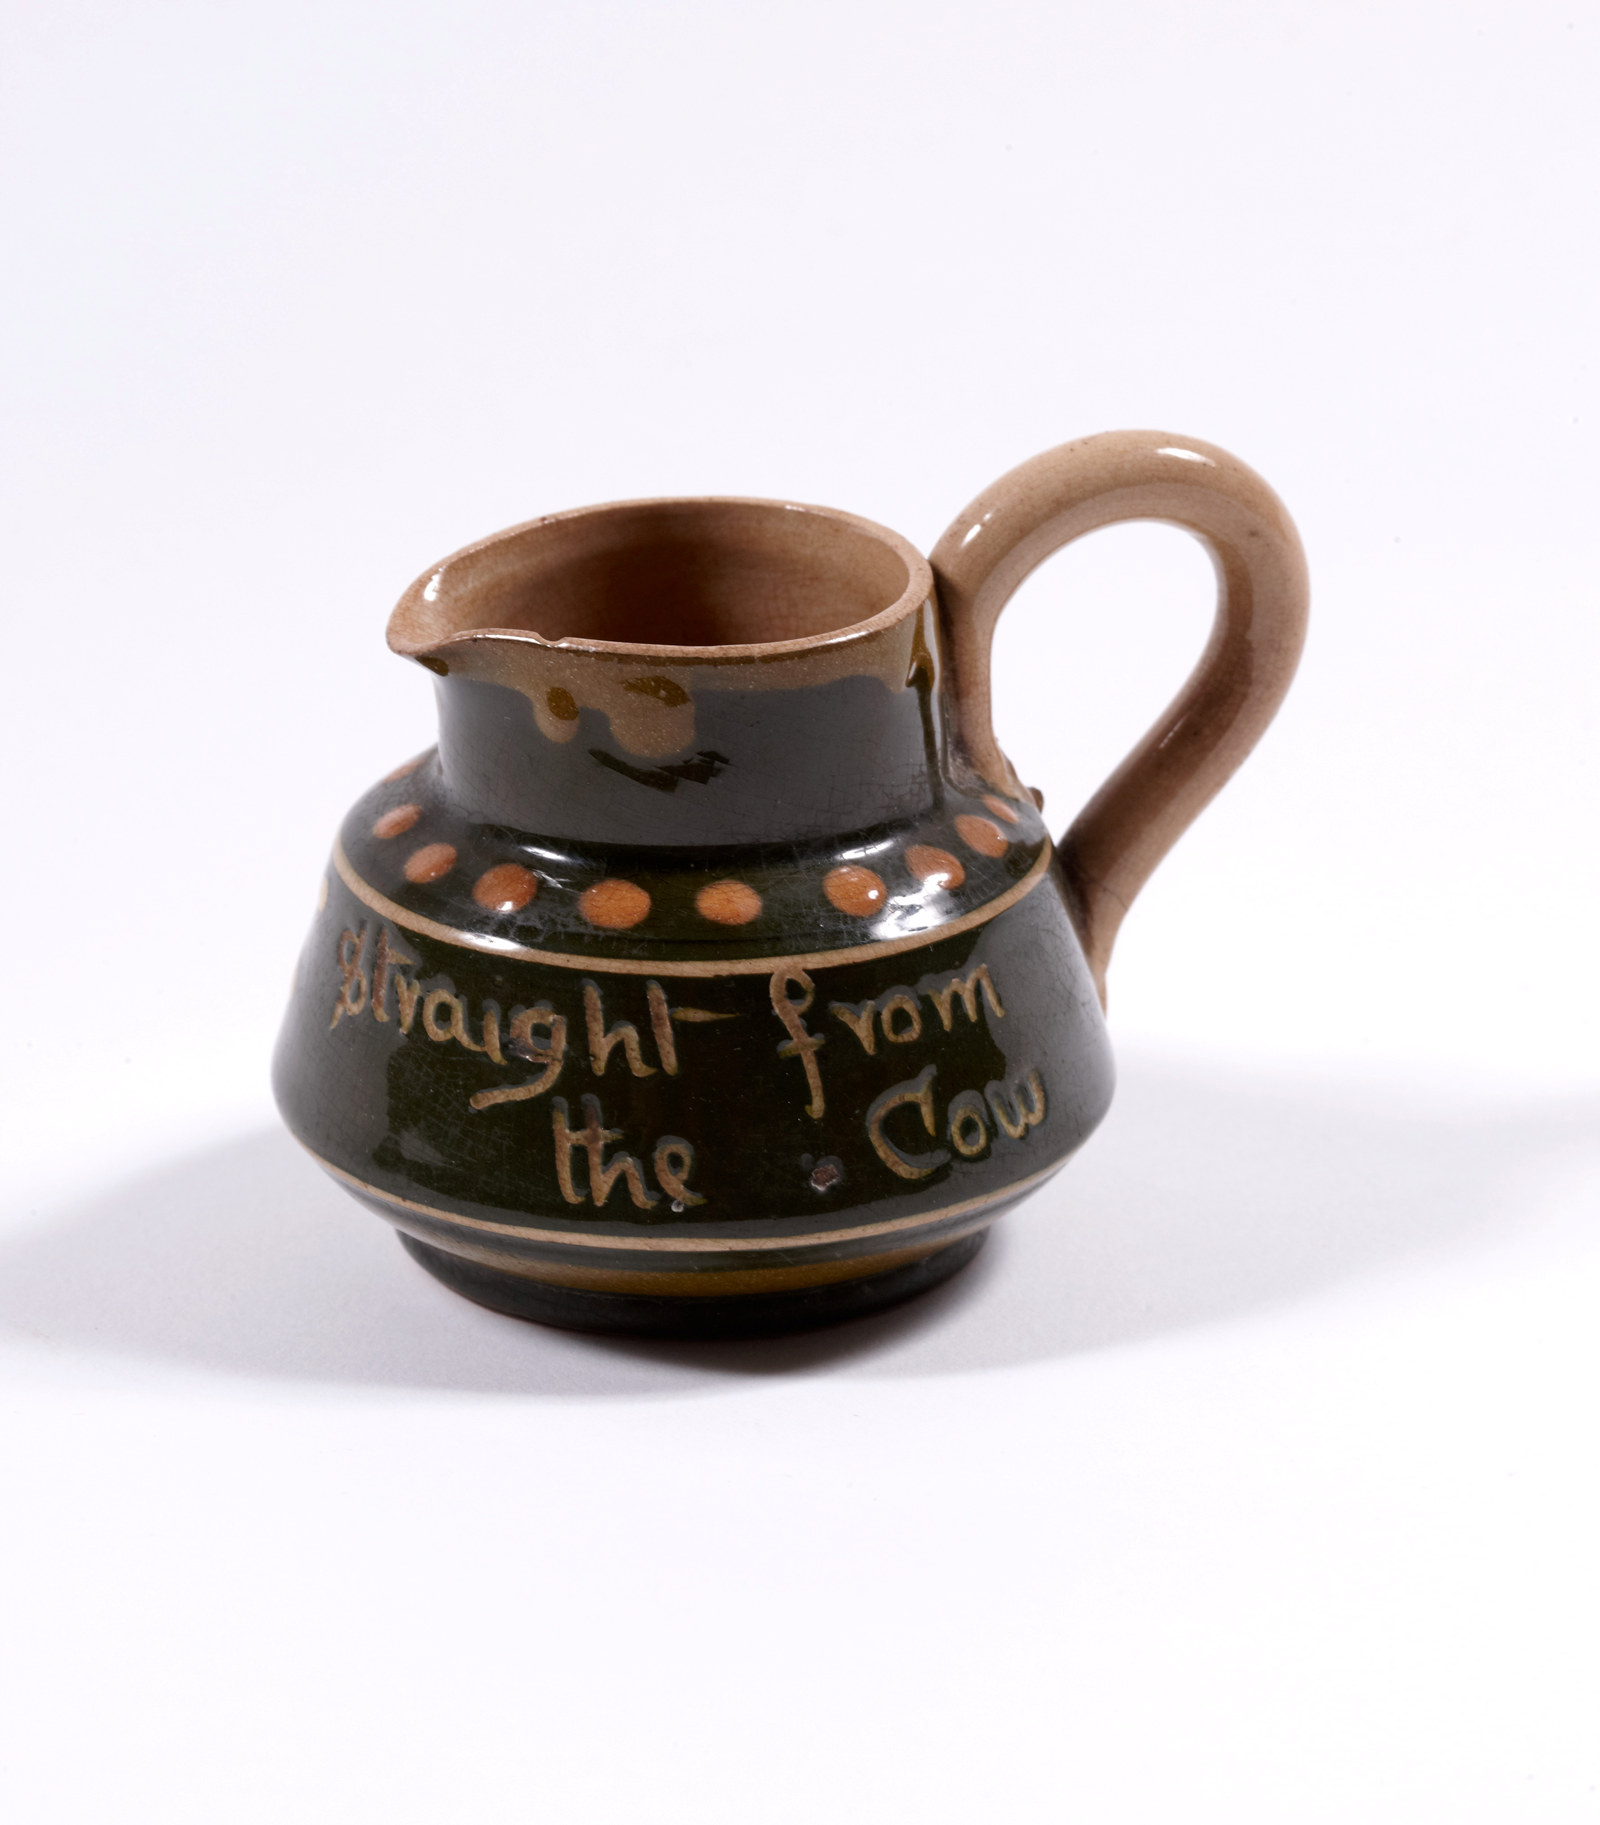 Torquay motto ware miniature cream jug made from glazed earthenware, 'Straight from the Cow' inscribed on one side